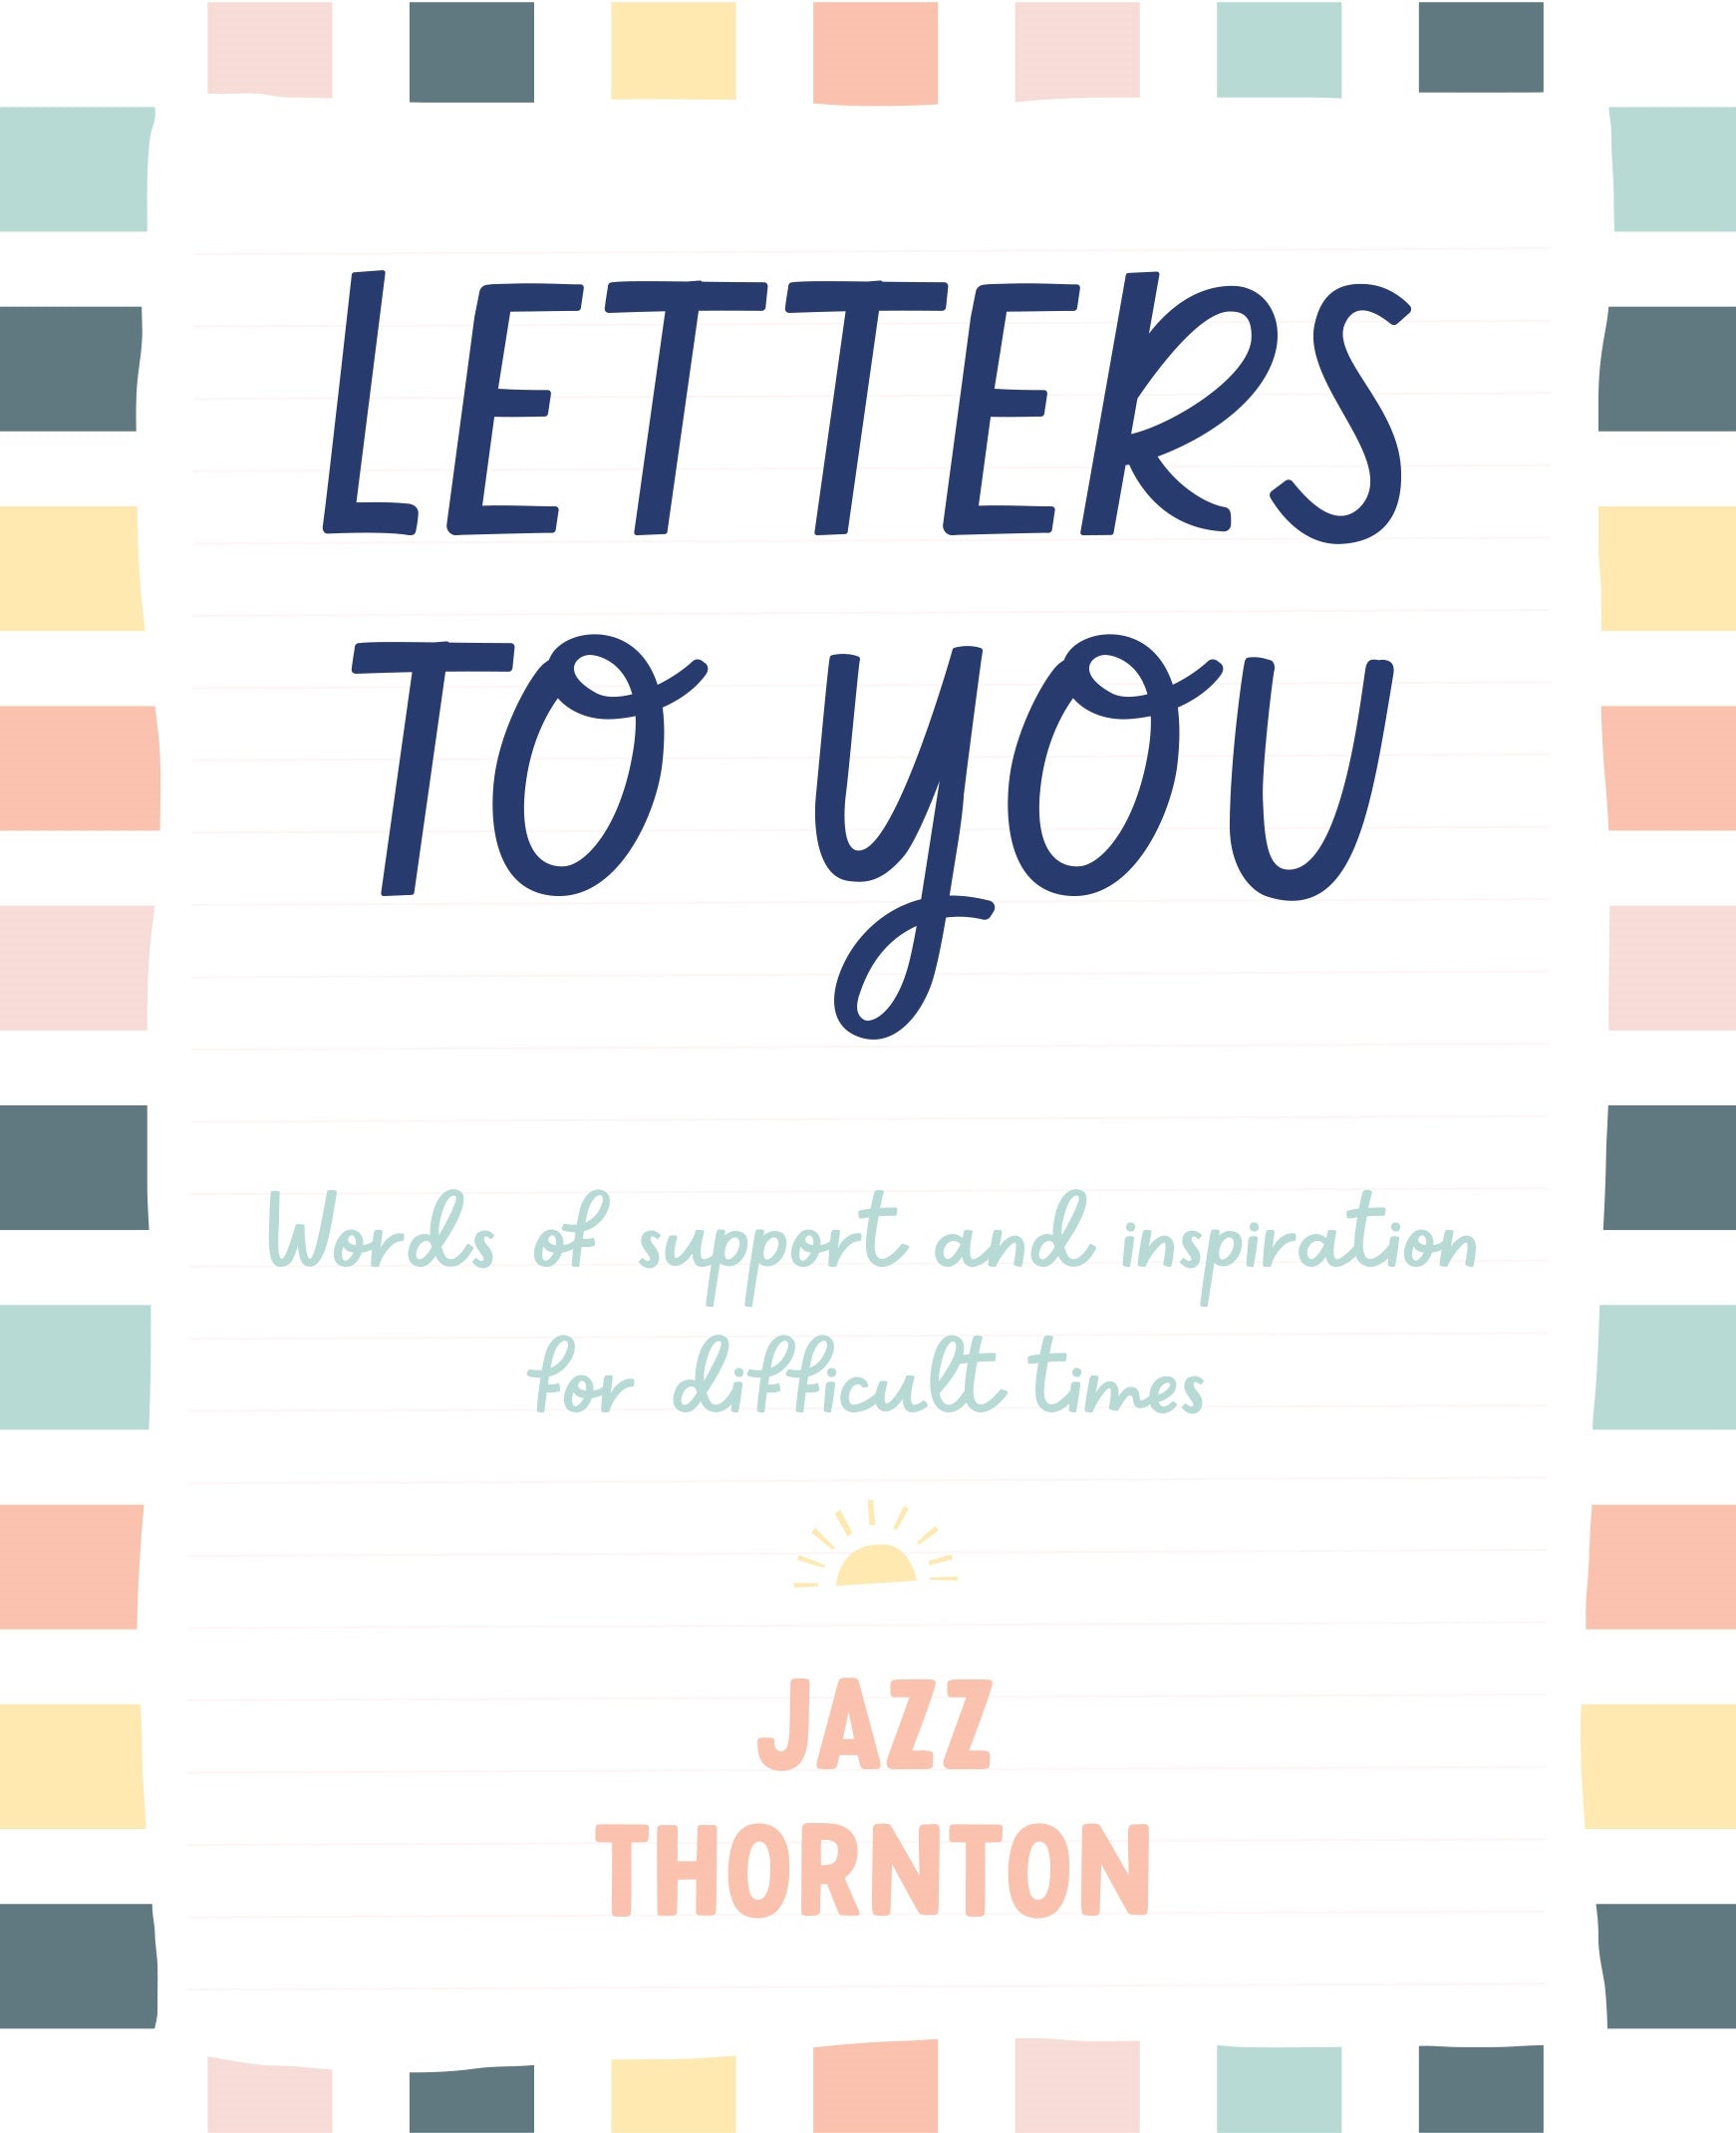 Letters to You Jazz Thornton - City Books & Lotto